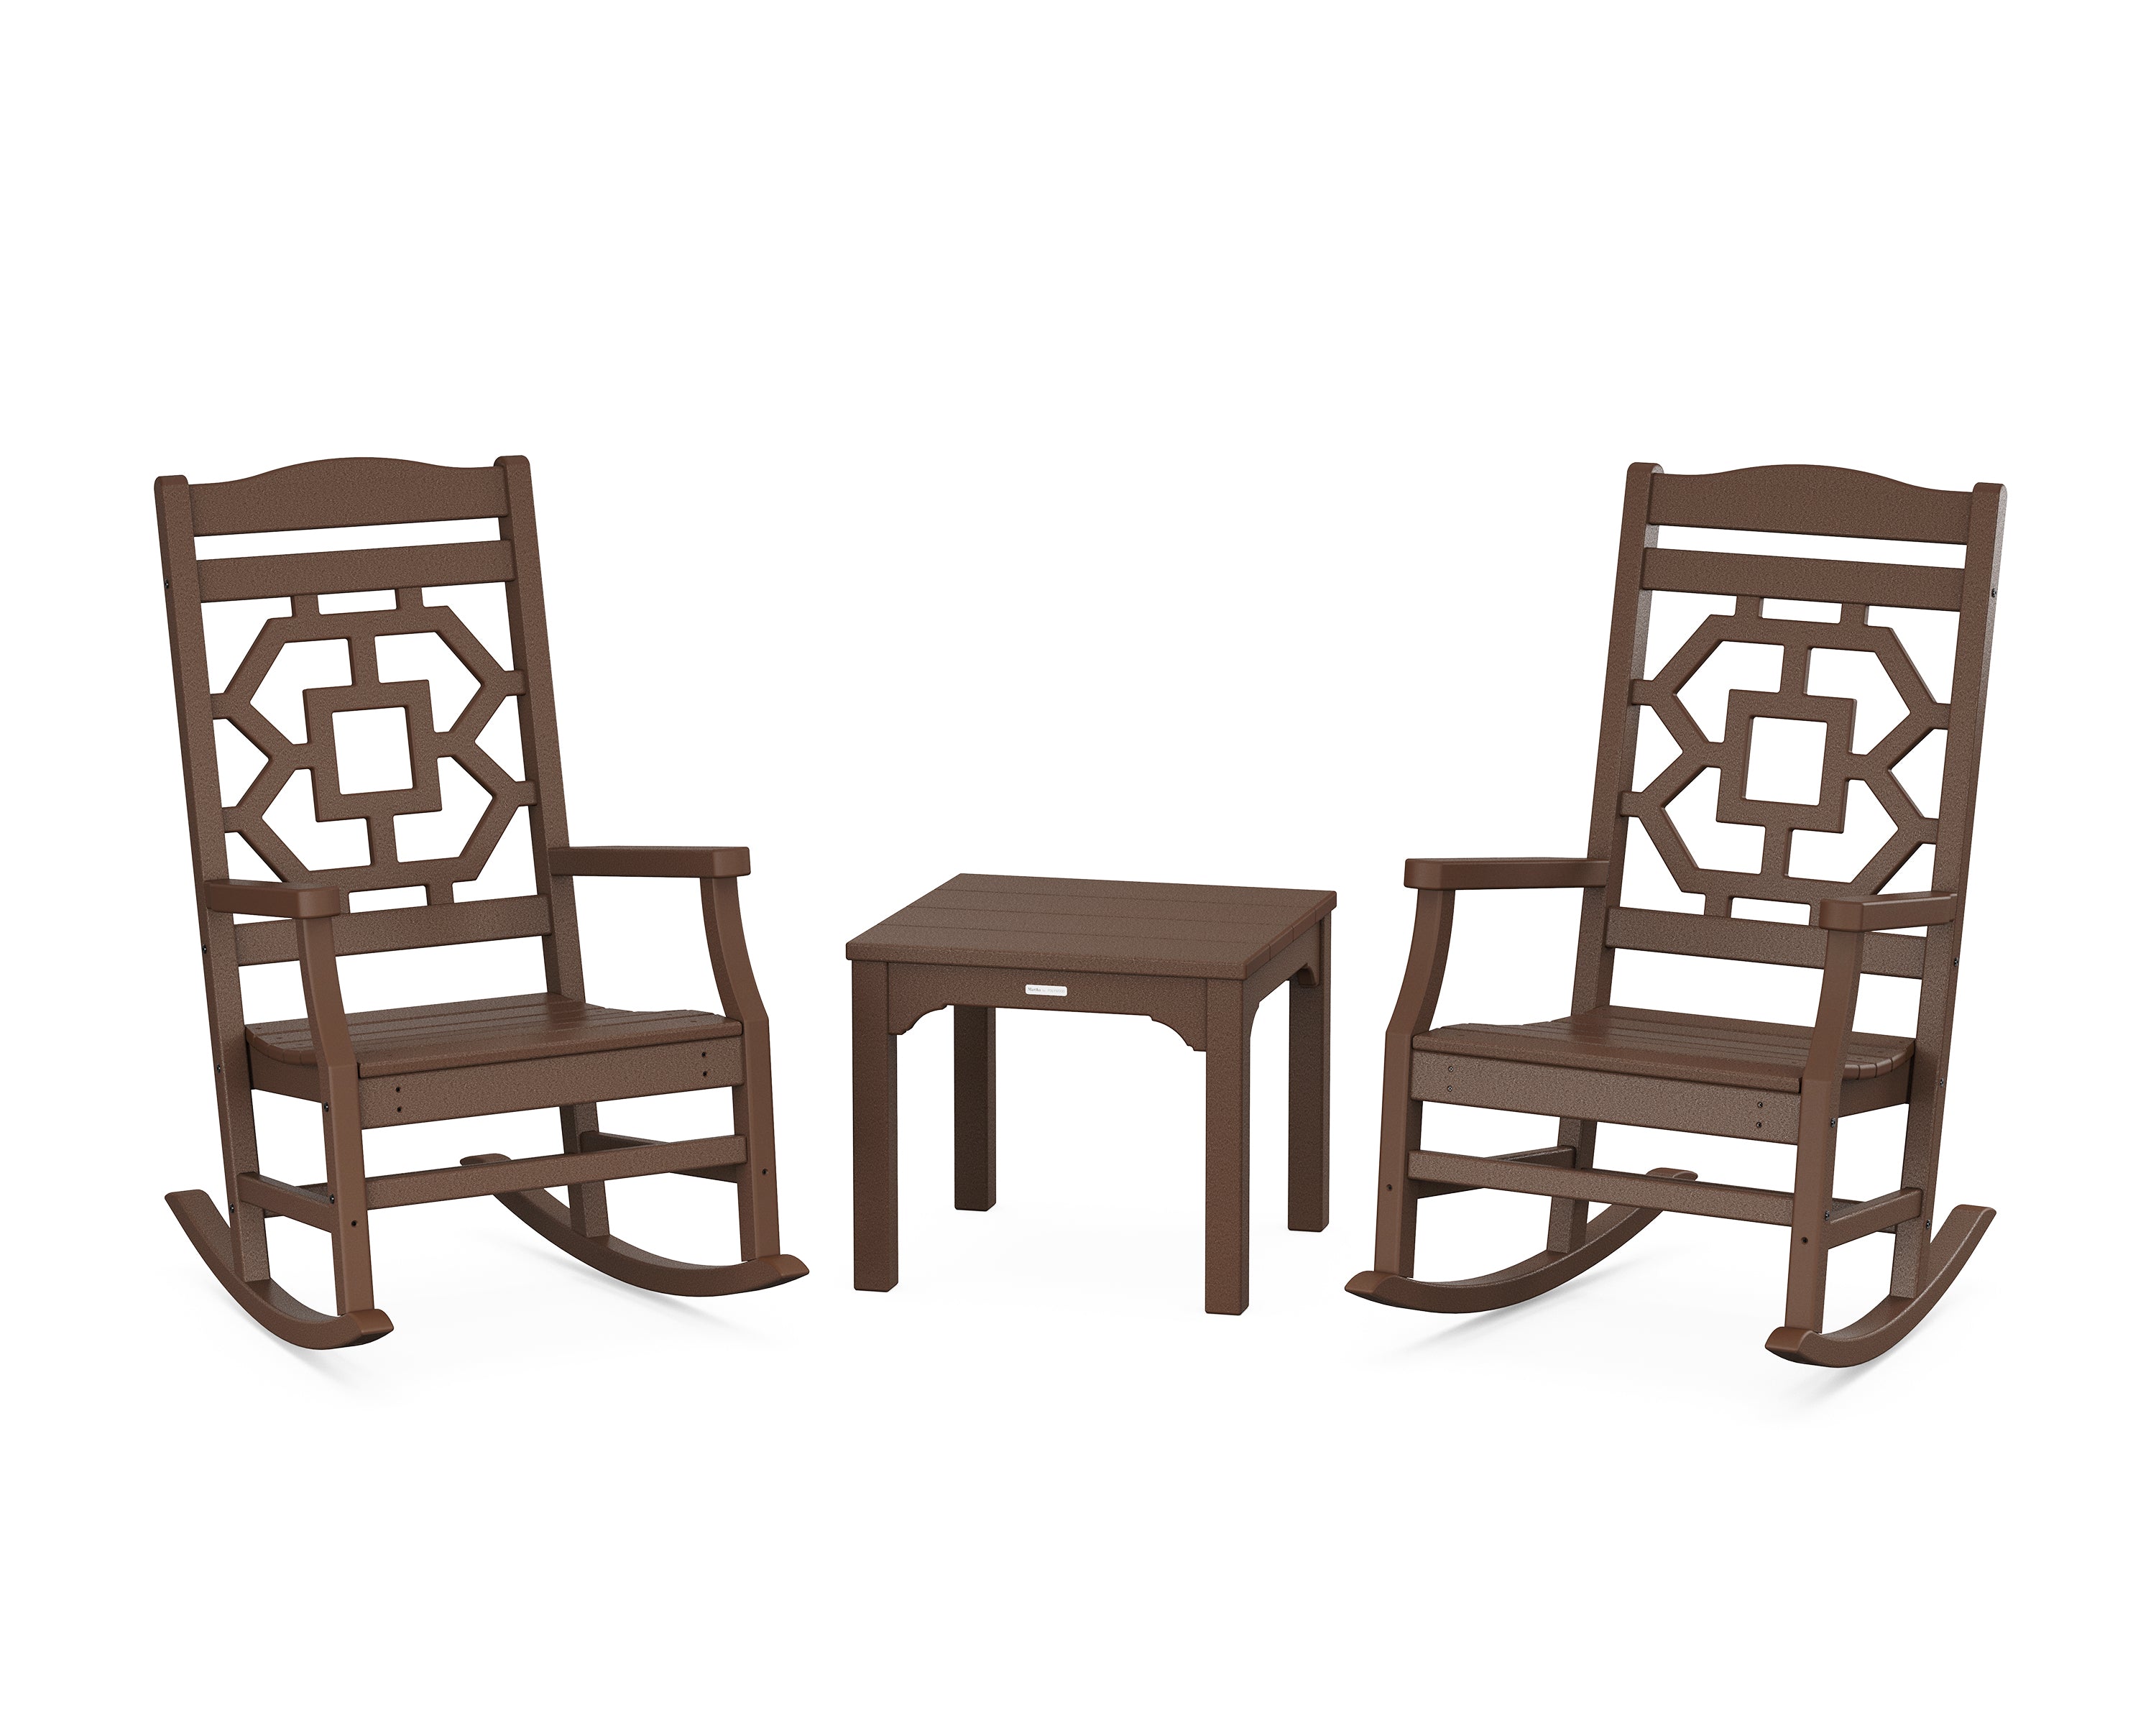 Martha Stewart by POLYWOOD® Chinoiserie 3-Piece Rocking Chair Set in Mahogany